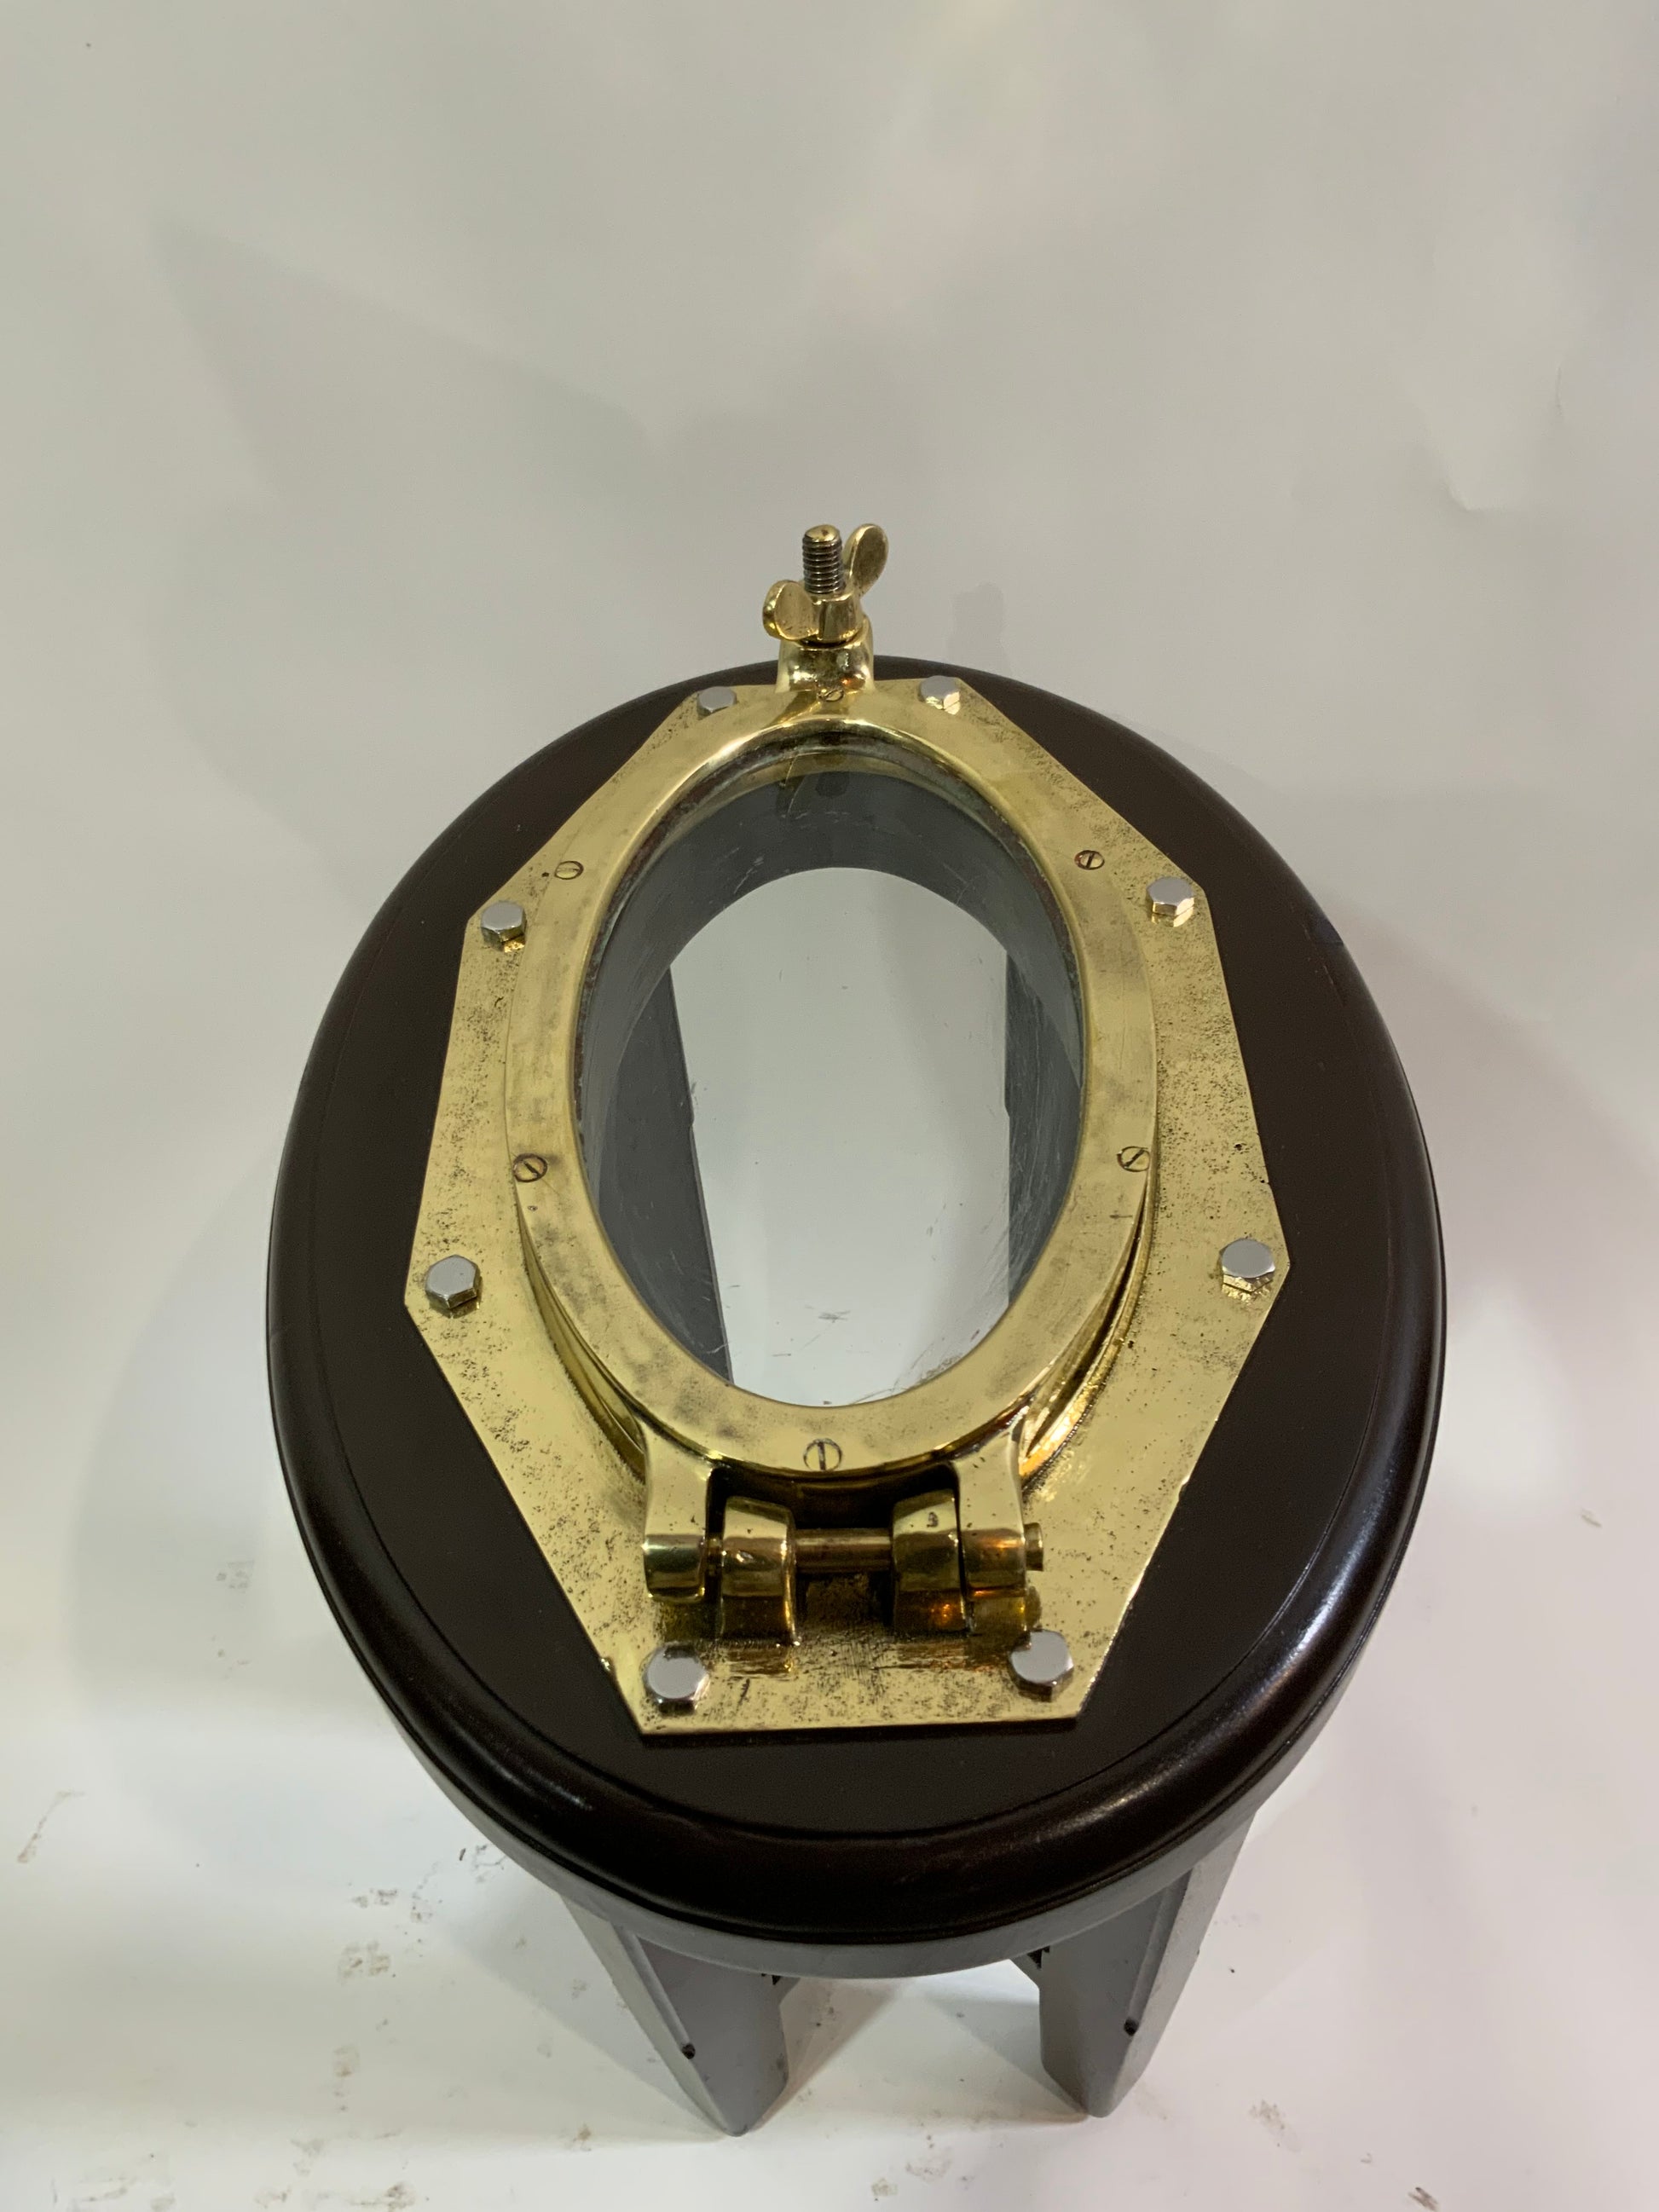 Authentic Solid Brass Boat Porthole Table - Lannan Gallery